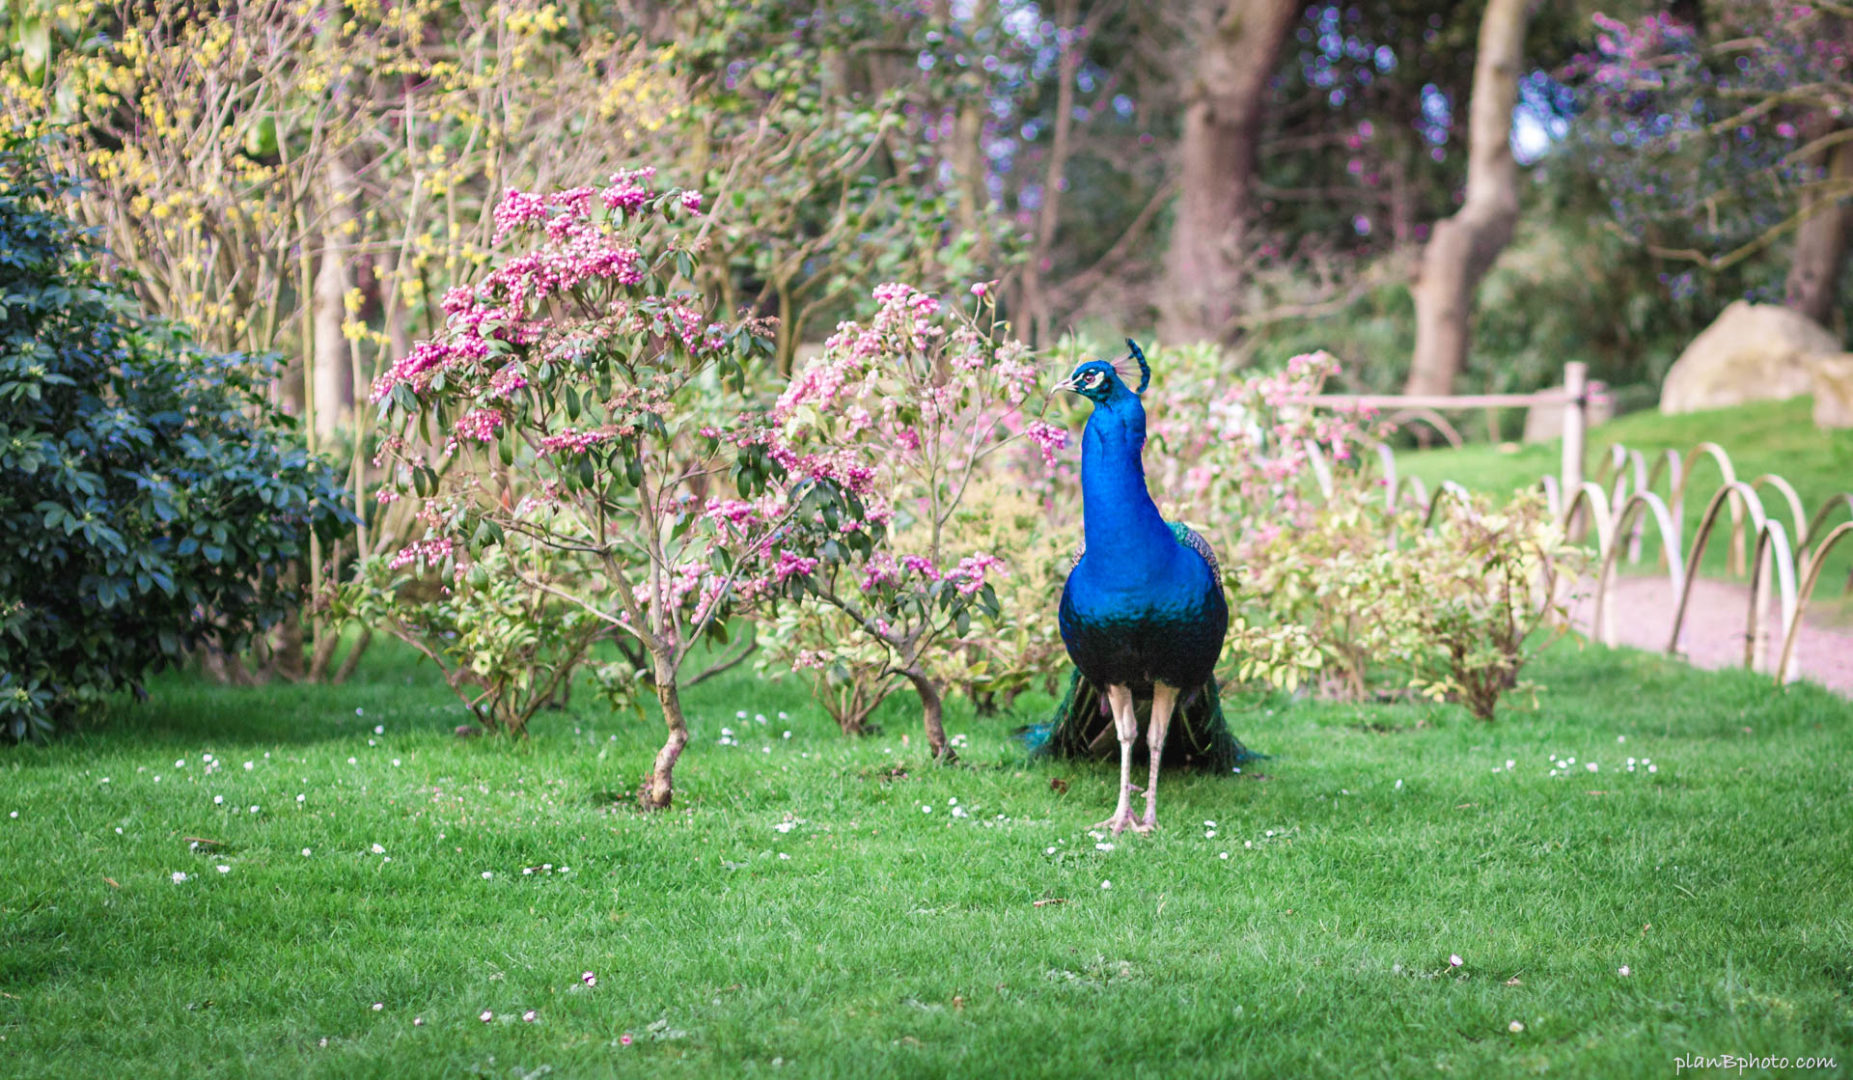 Peacock near a pink blooming tree in a park